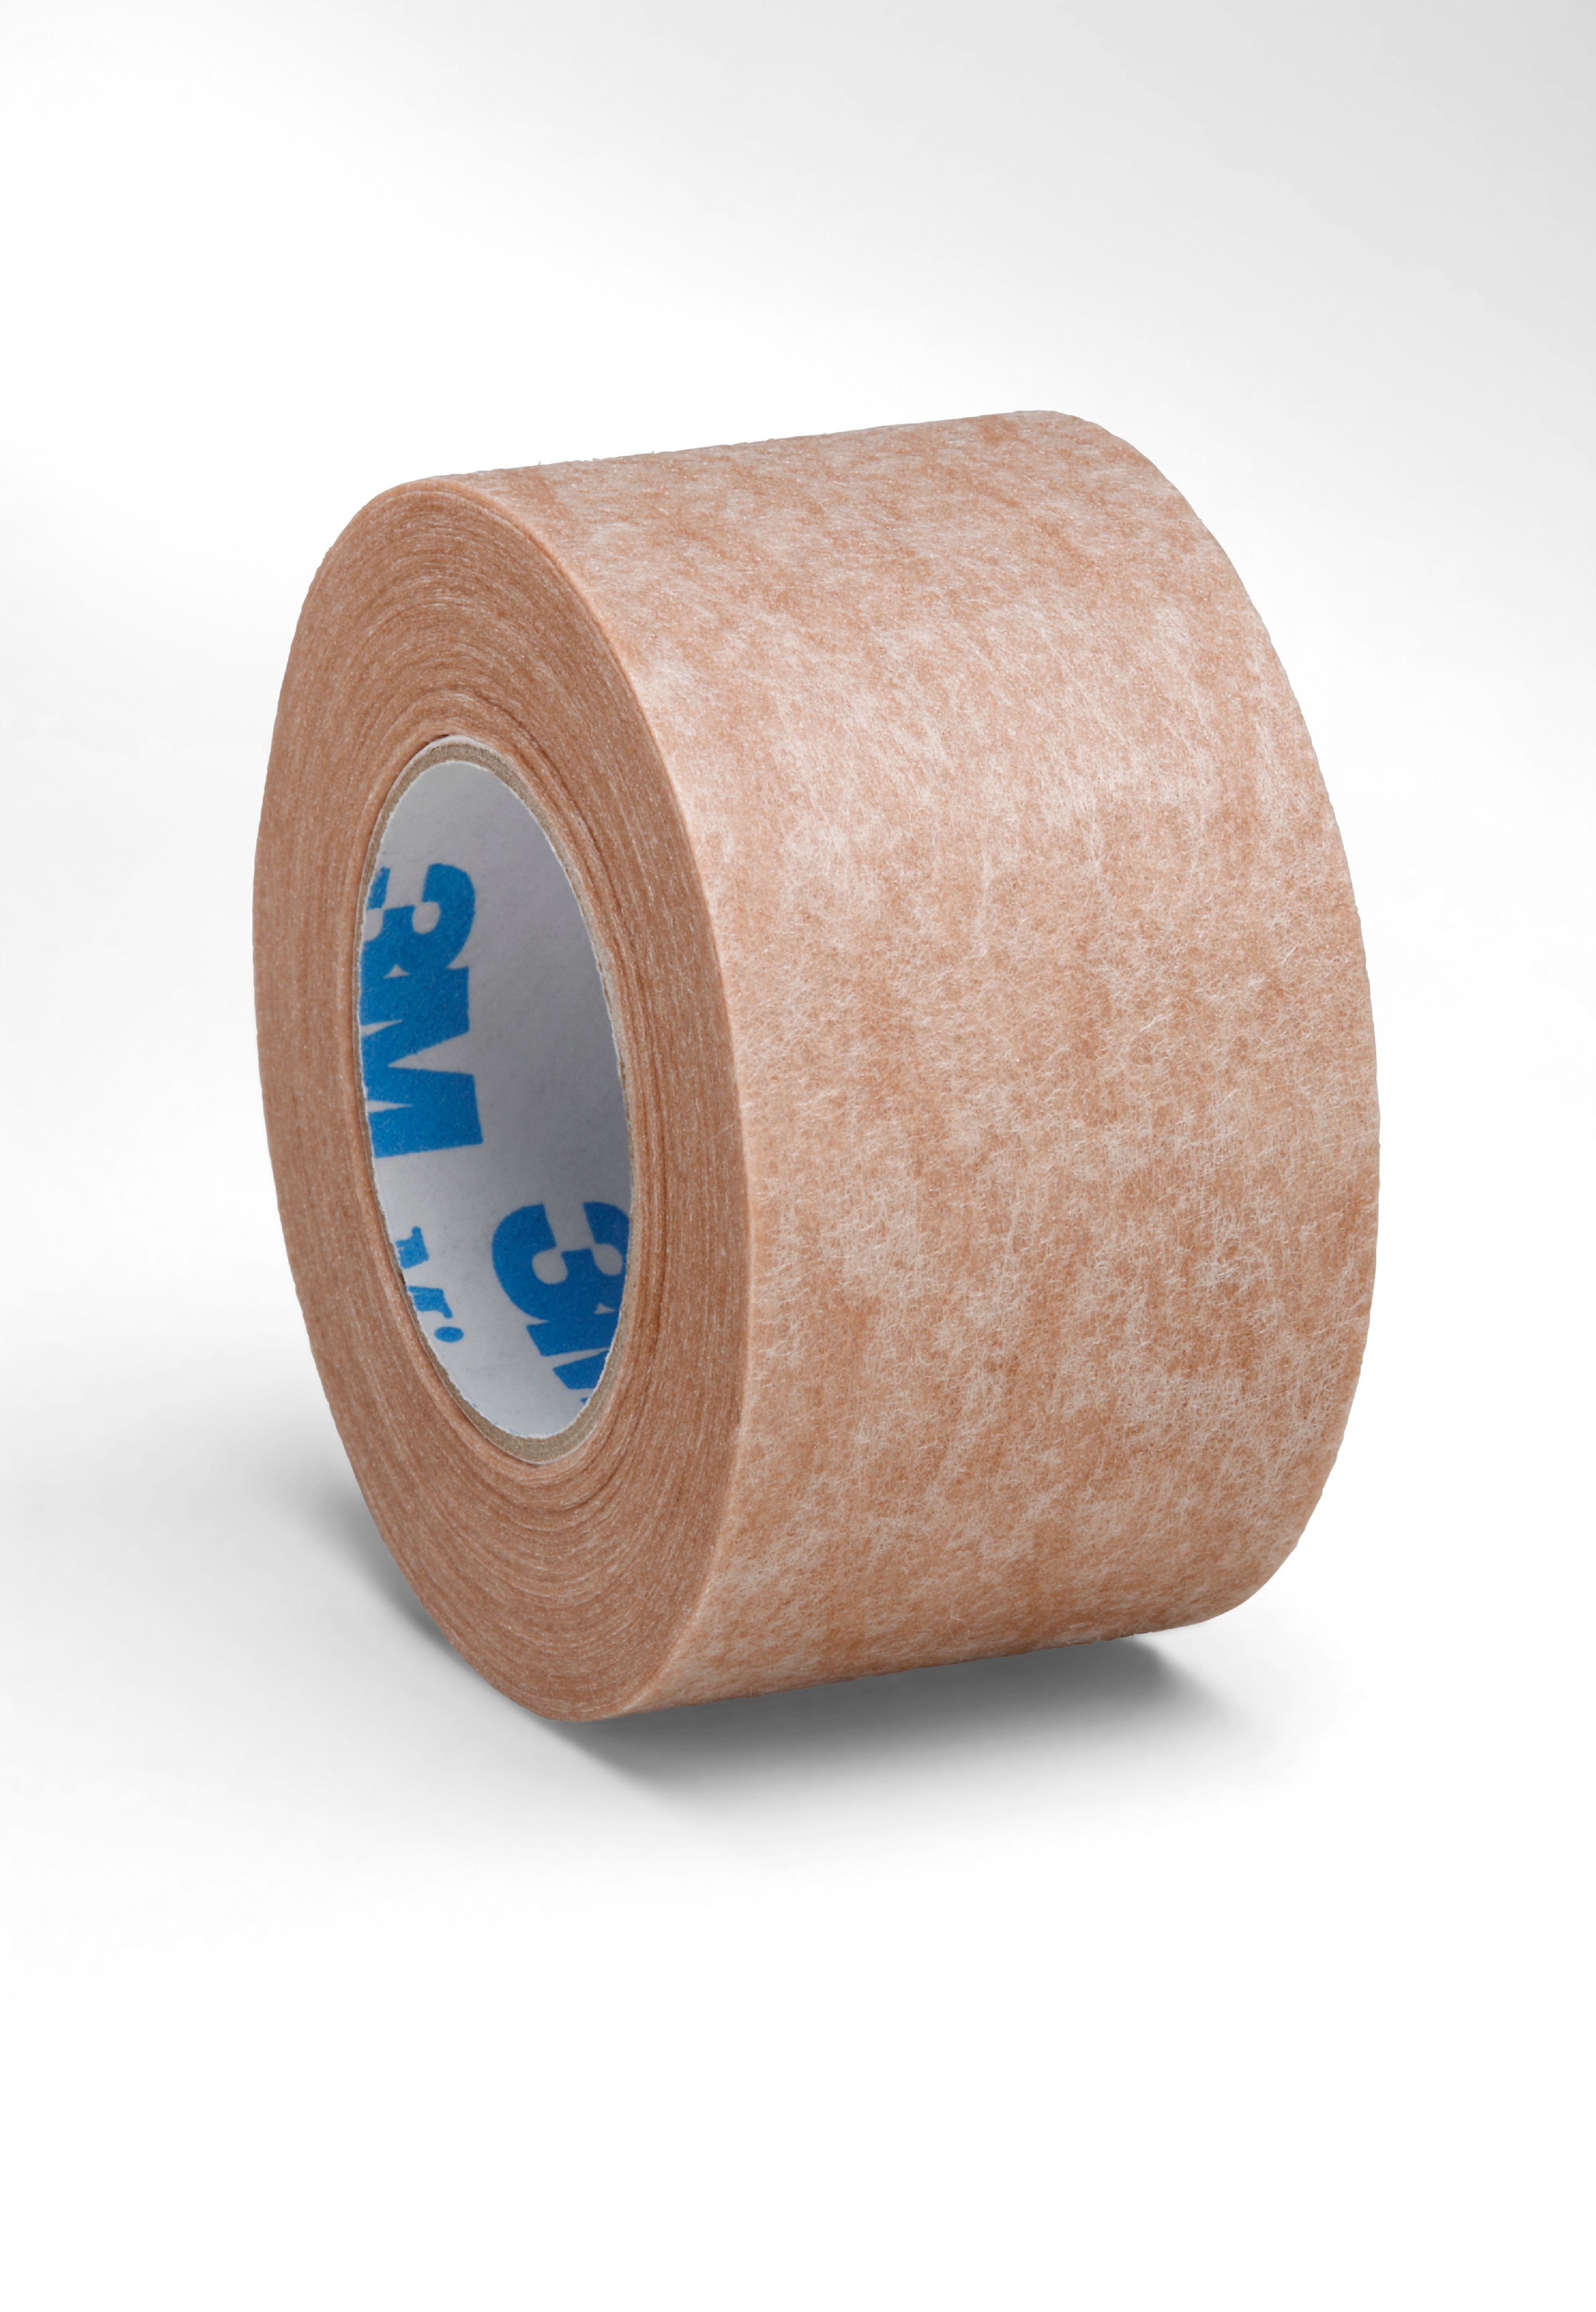 Micropore™ (Non-Sterile) 1 Inch x 10 Yards Medical Tape - Box/12: Clint  Pharmaceuticals